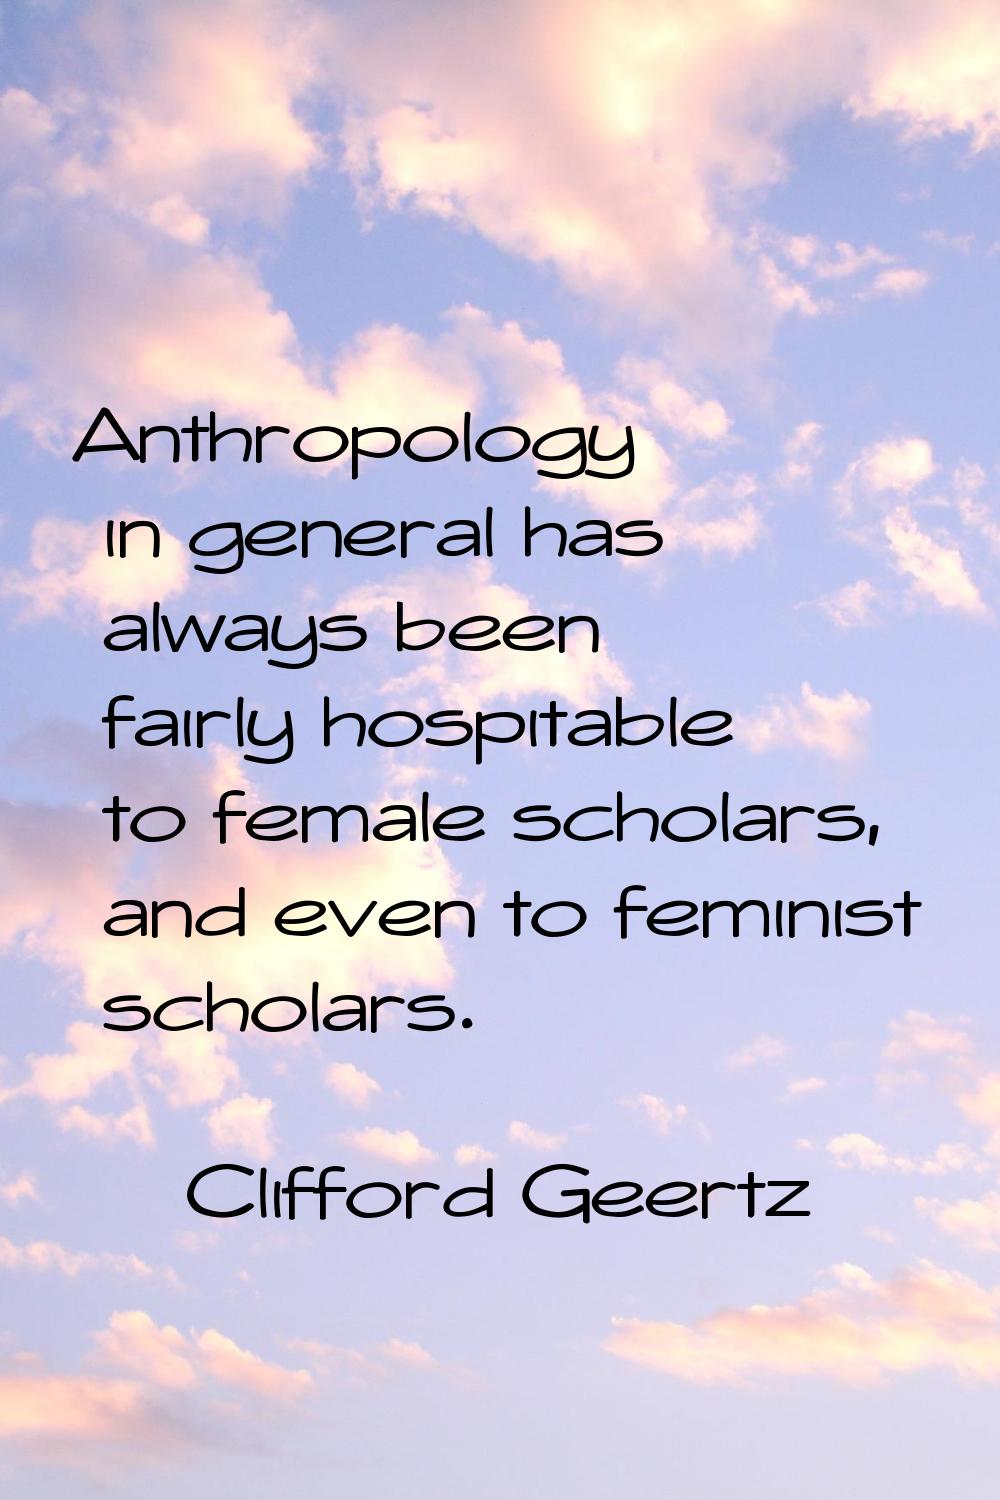 Anthropology in general has always been fairly hospitable to female scholars, and even to feminist 